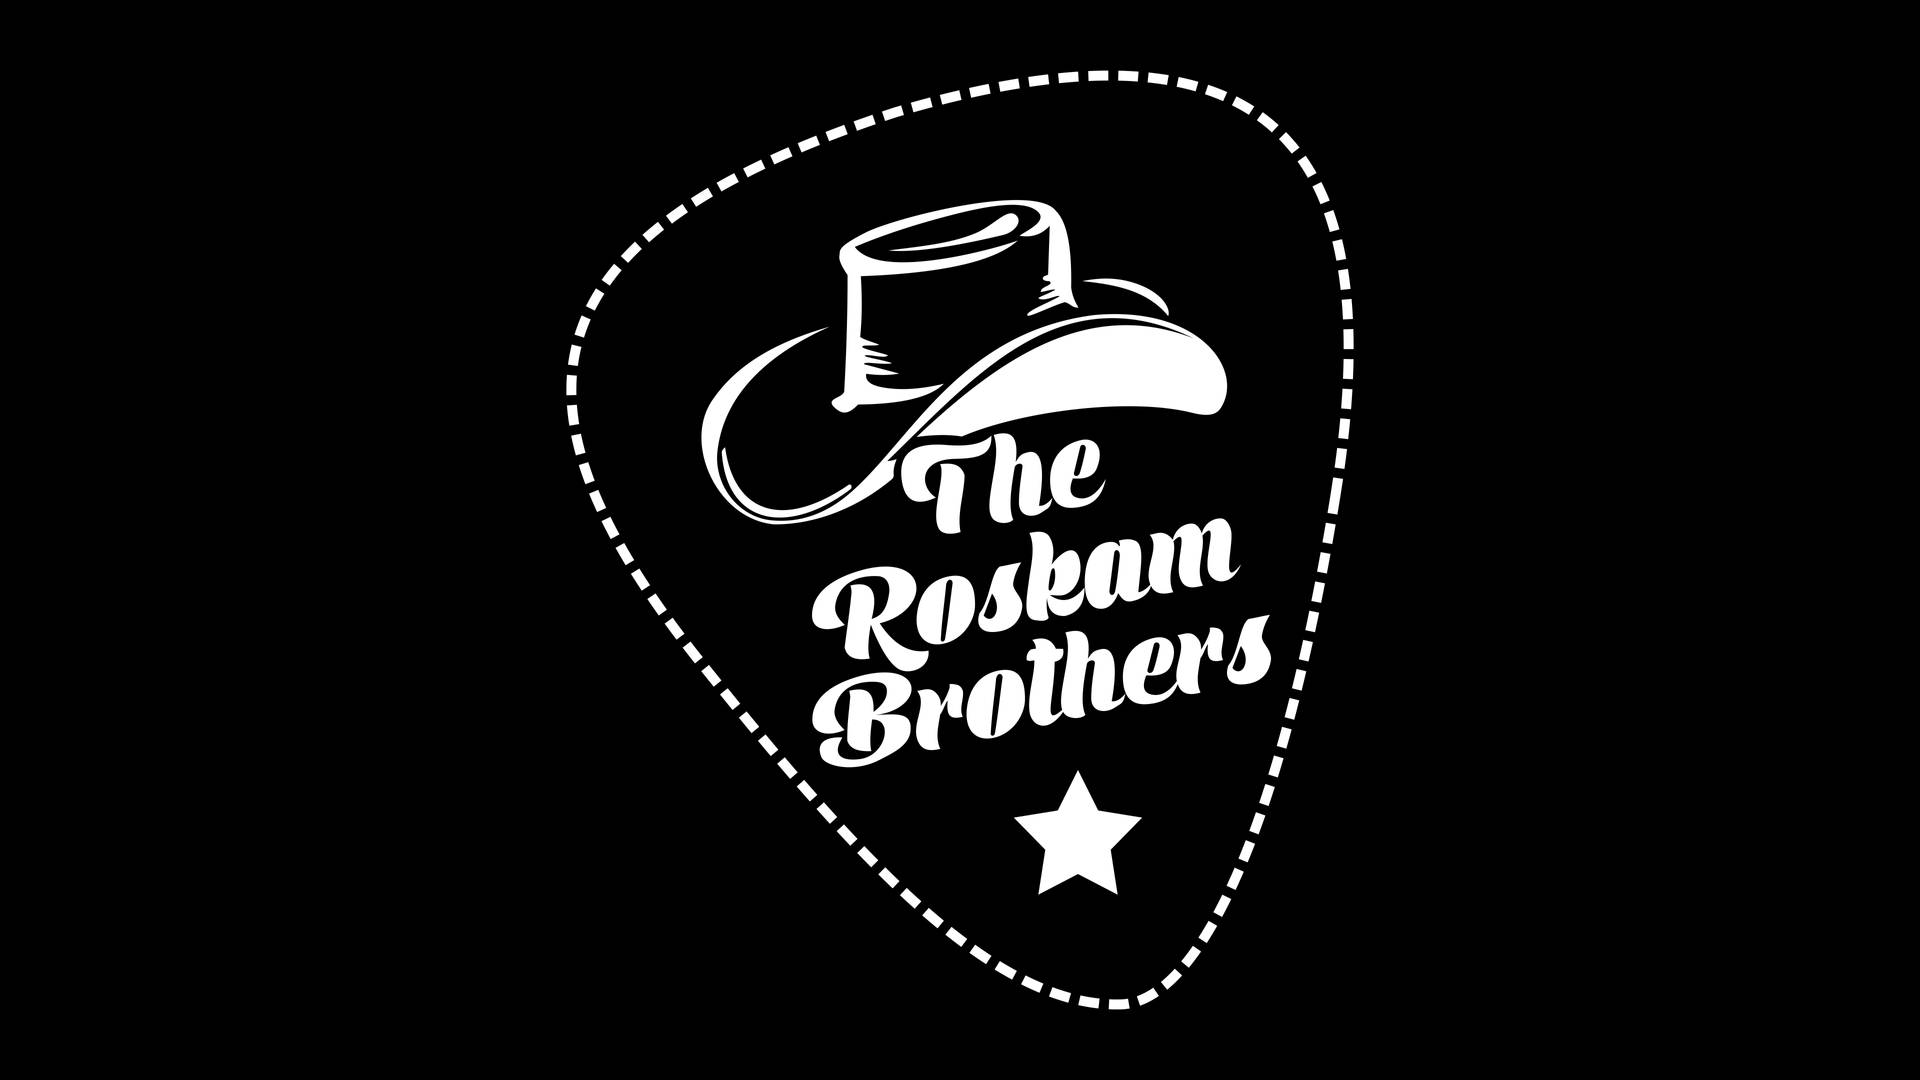 Far Cry 5 The Roskam Brothers Logo